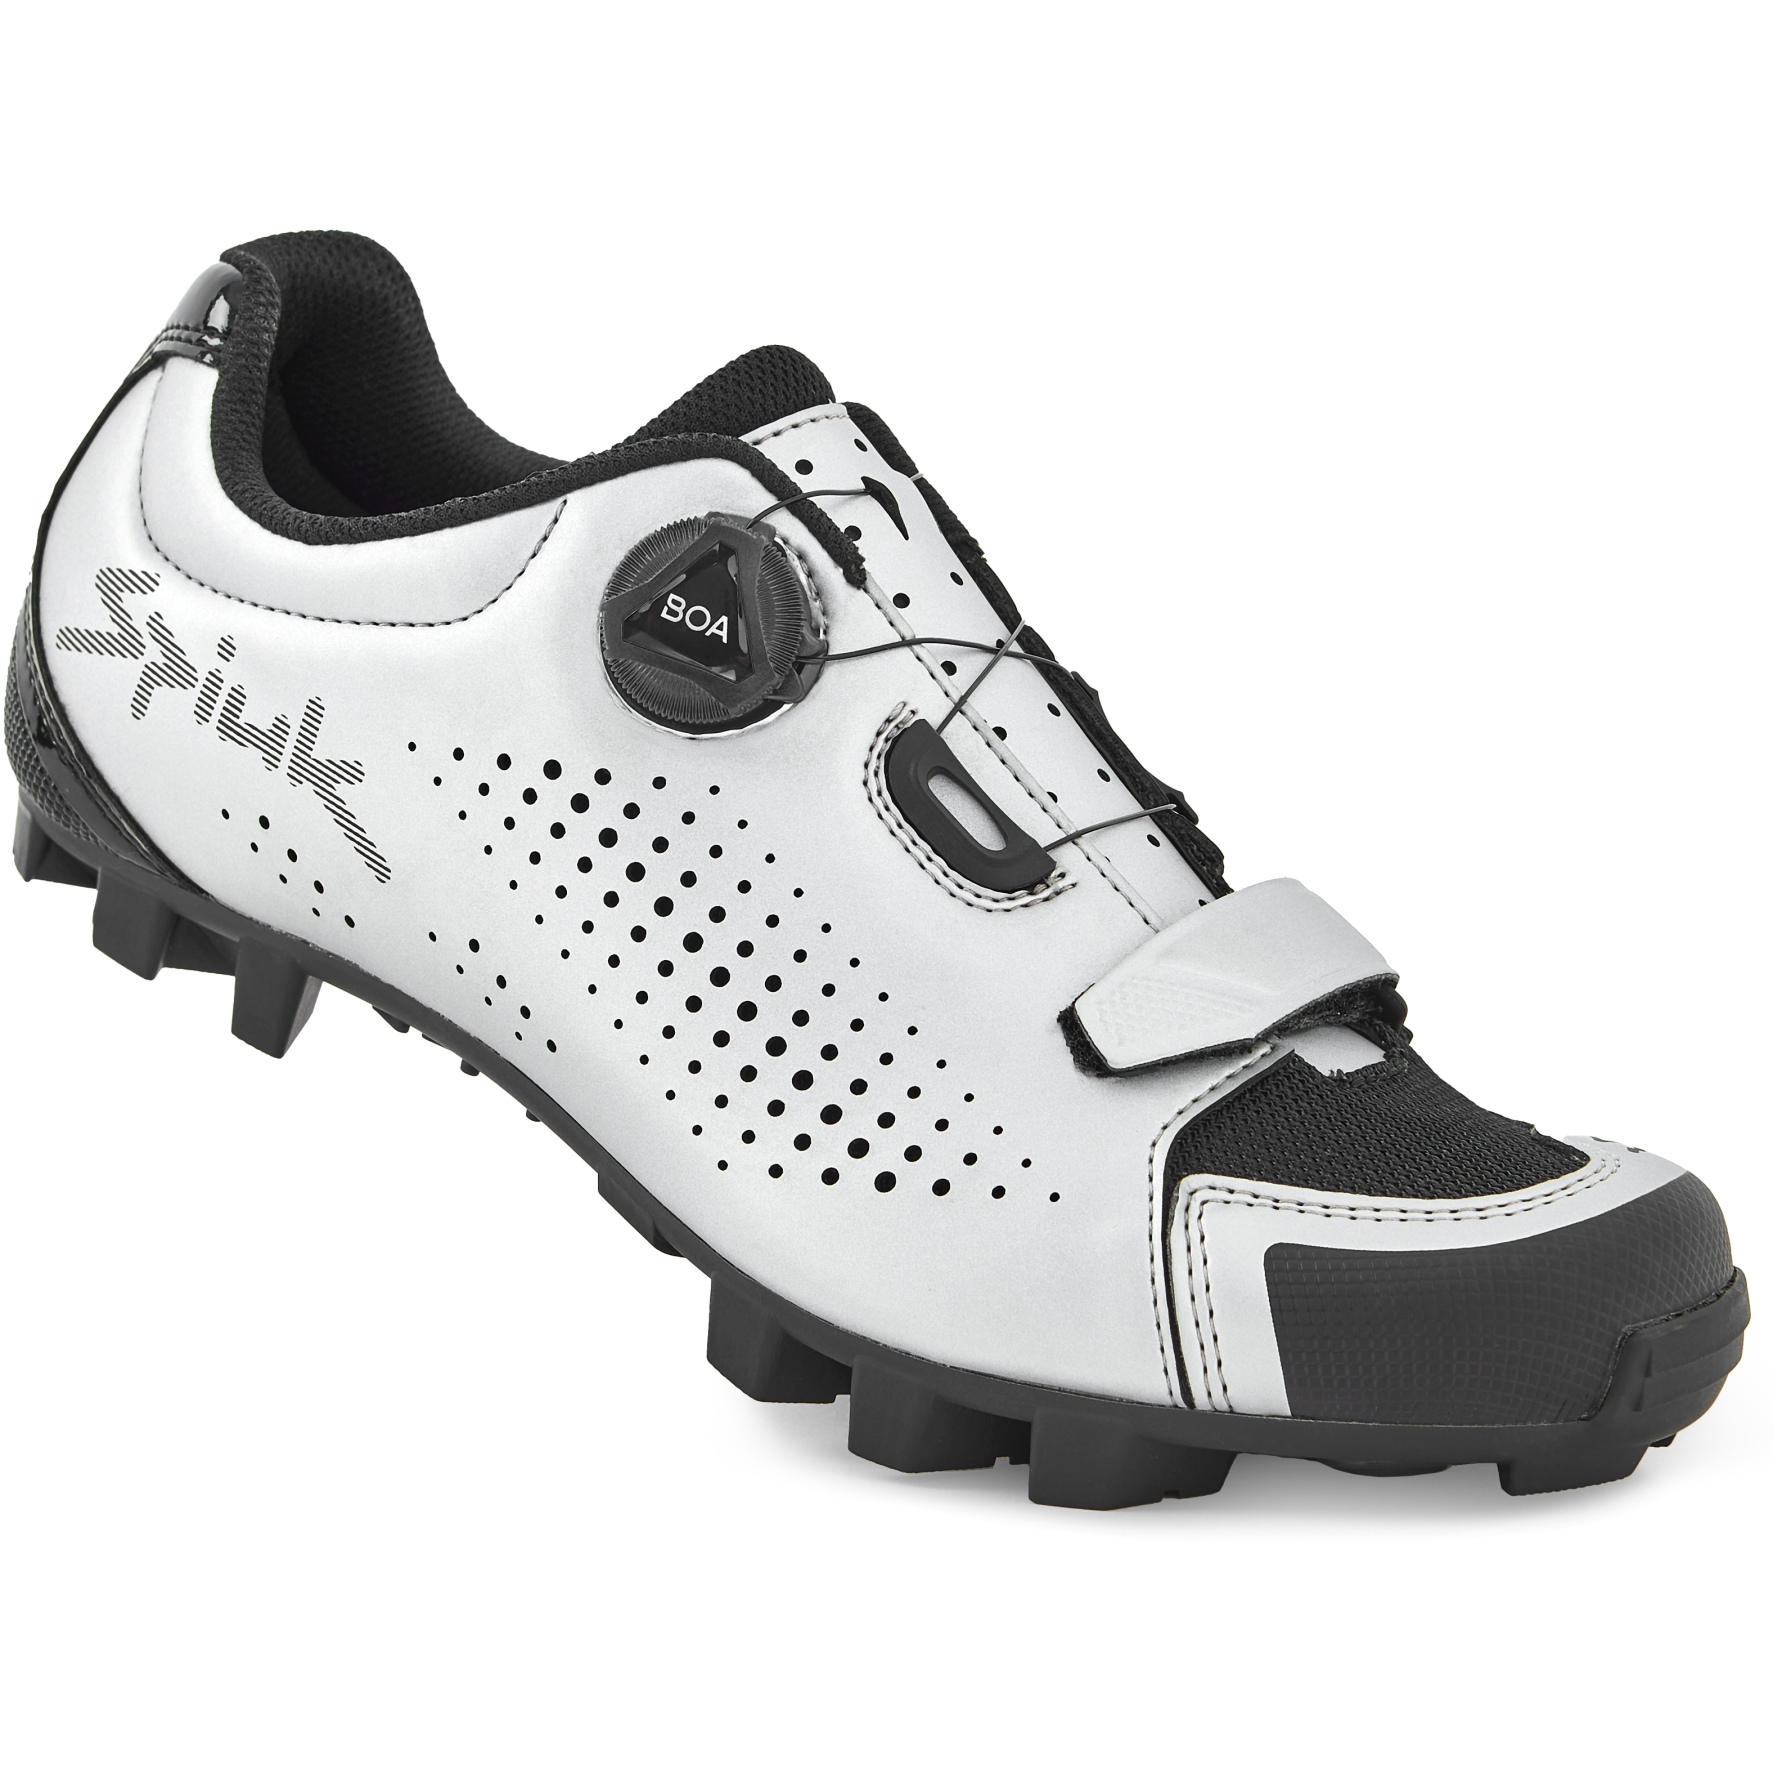 Picture of Spiuk Mondie MTB Shoe - silver